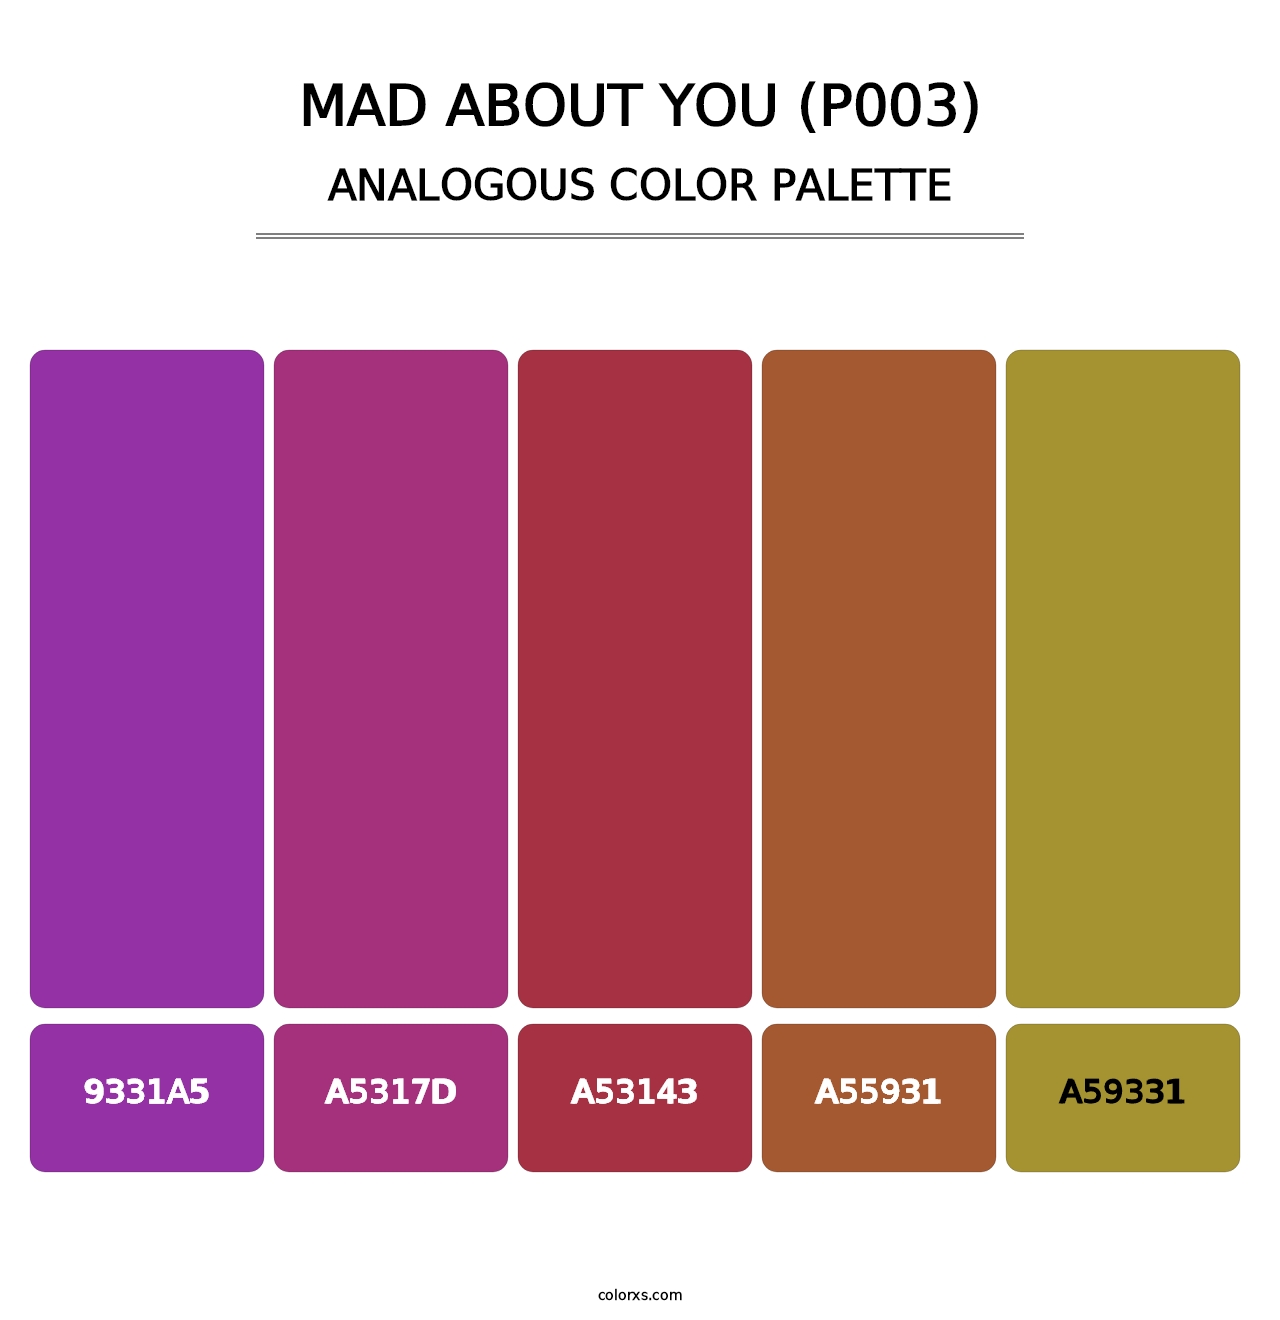 Mad About You (P003) - Analogous Color Palette